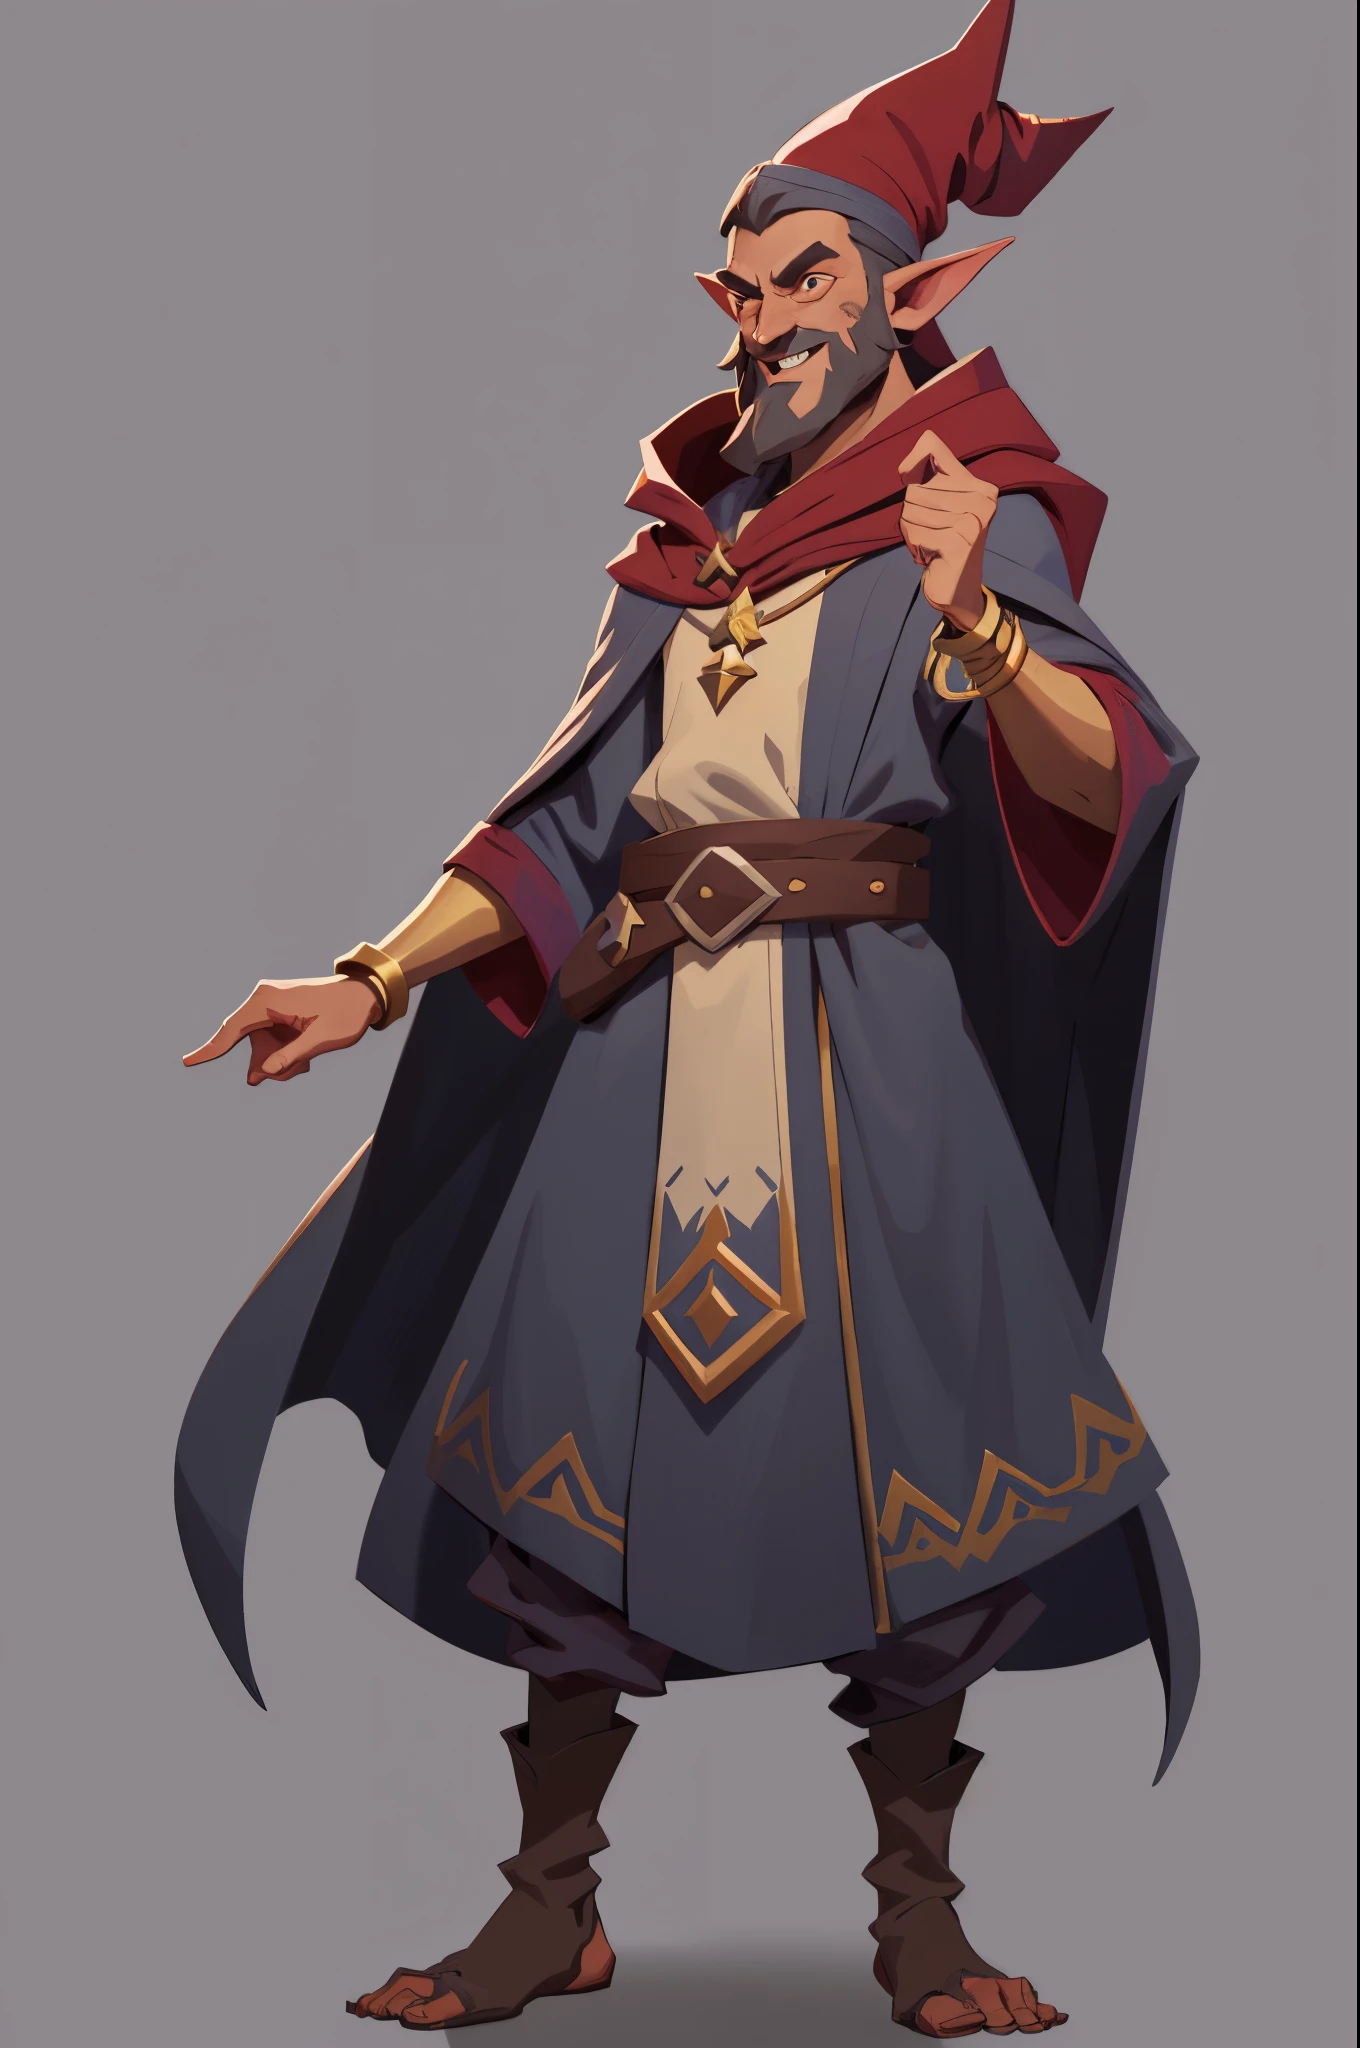 1boy, GOBLIN with DARK RED SKIN, pointed ears, broad nose, BEARD, wearing wizard robes, mstoconcept art, european and american cartoons, game character design, solo, BACKGROUND, GRAY BACKGROUND, WIZARD, FULL BODY, STANDING, SMILING, ROBE, HOOD, JEWELRY, BRACELET, WIDE SLEEVES, BELT, GEMSTONE, LONG SLEEVES,